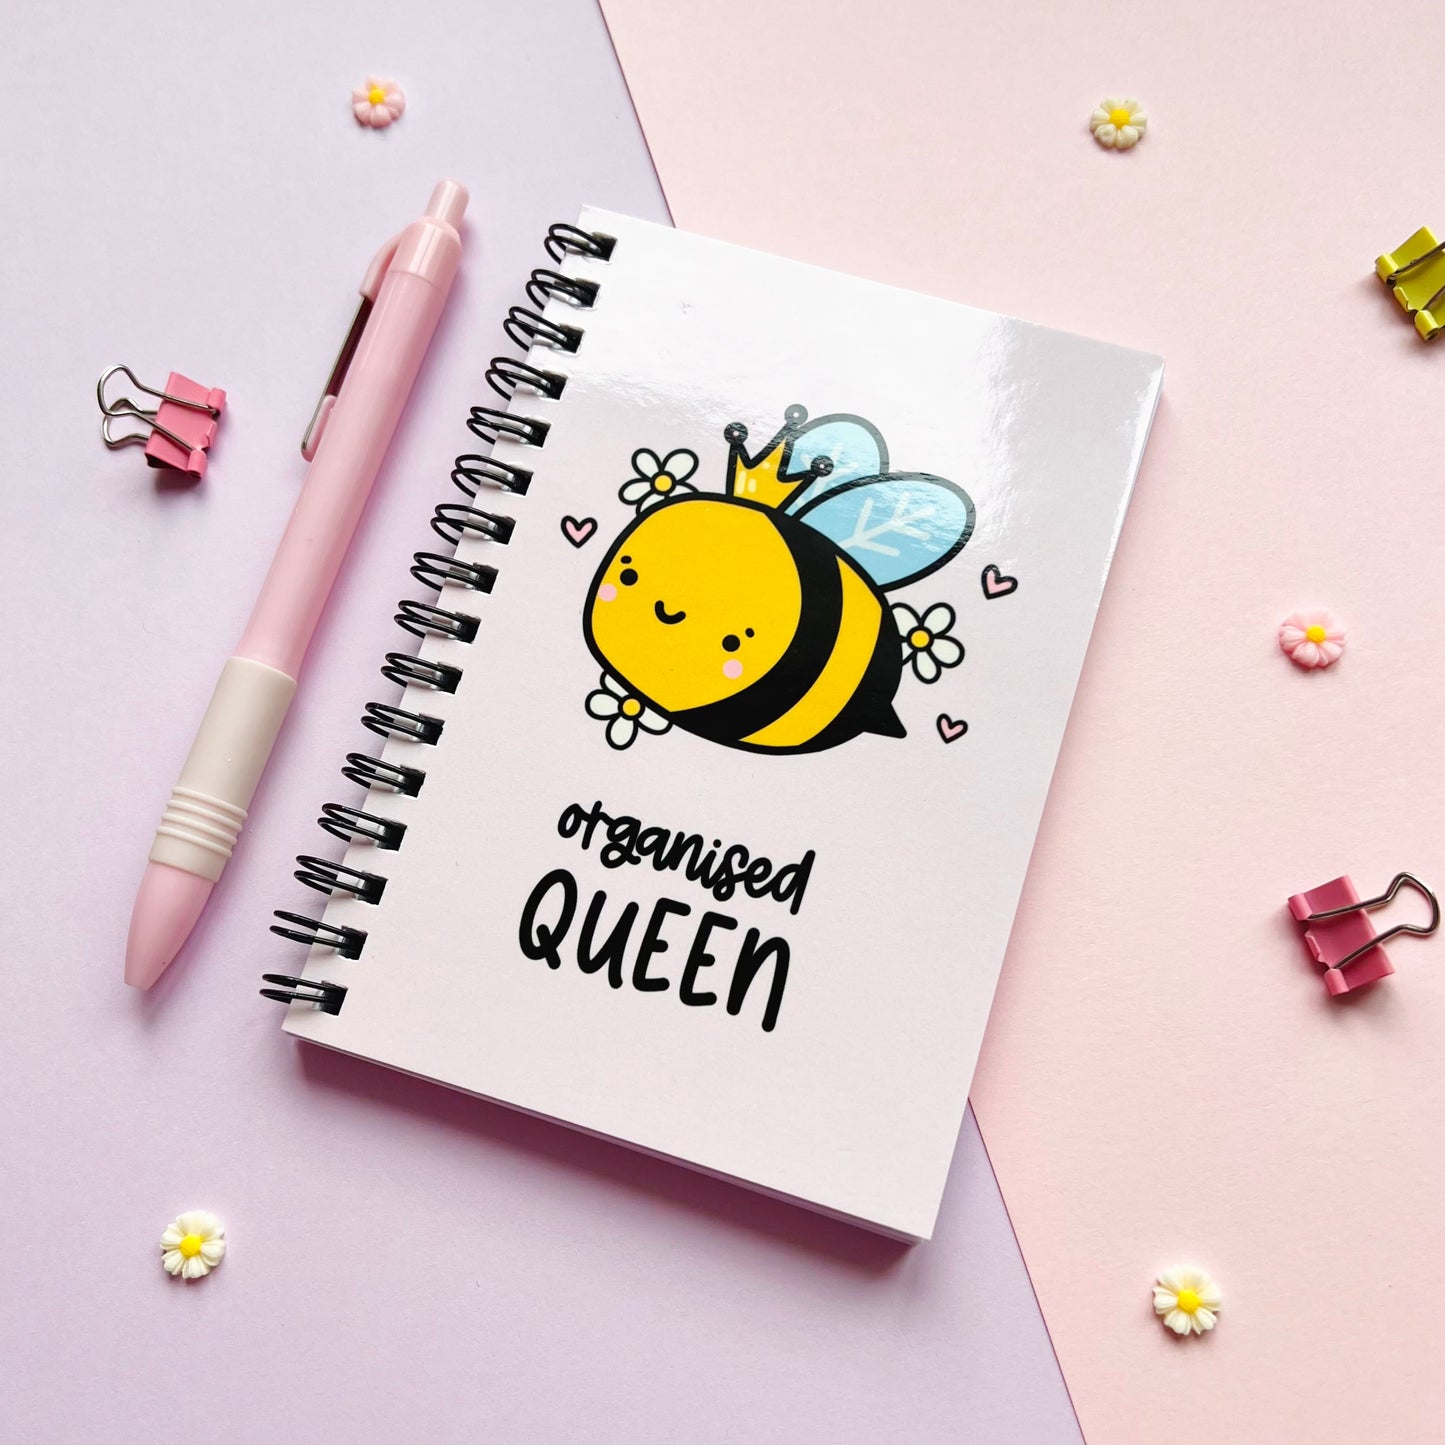 A6 Organised Queen Notebook